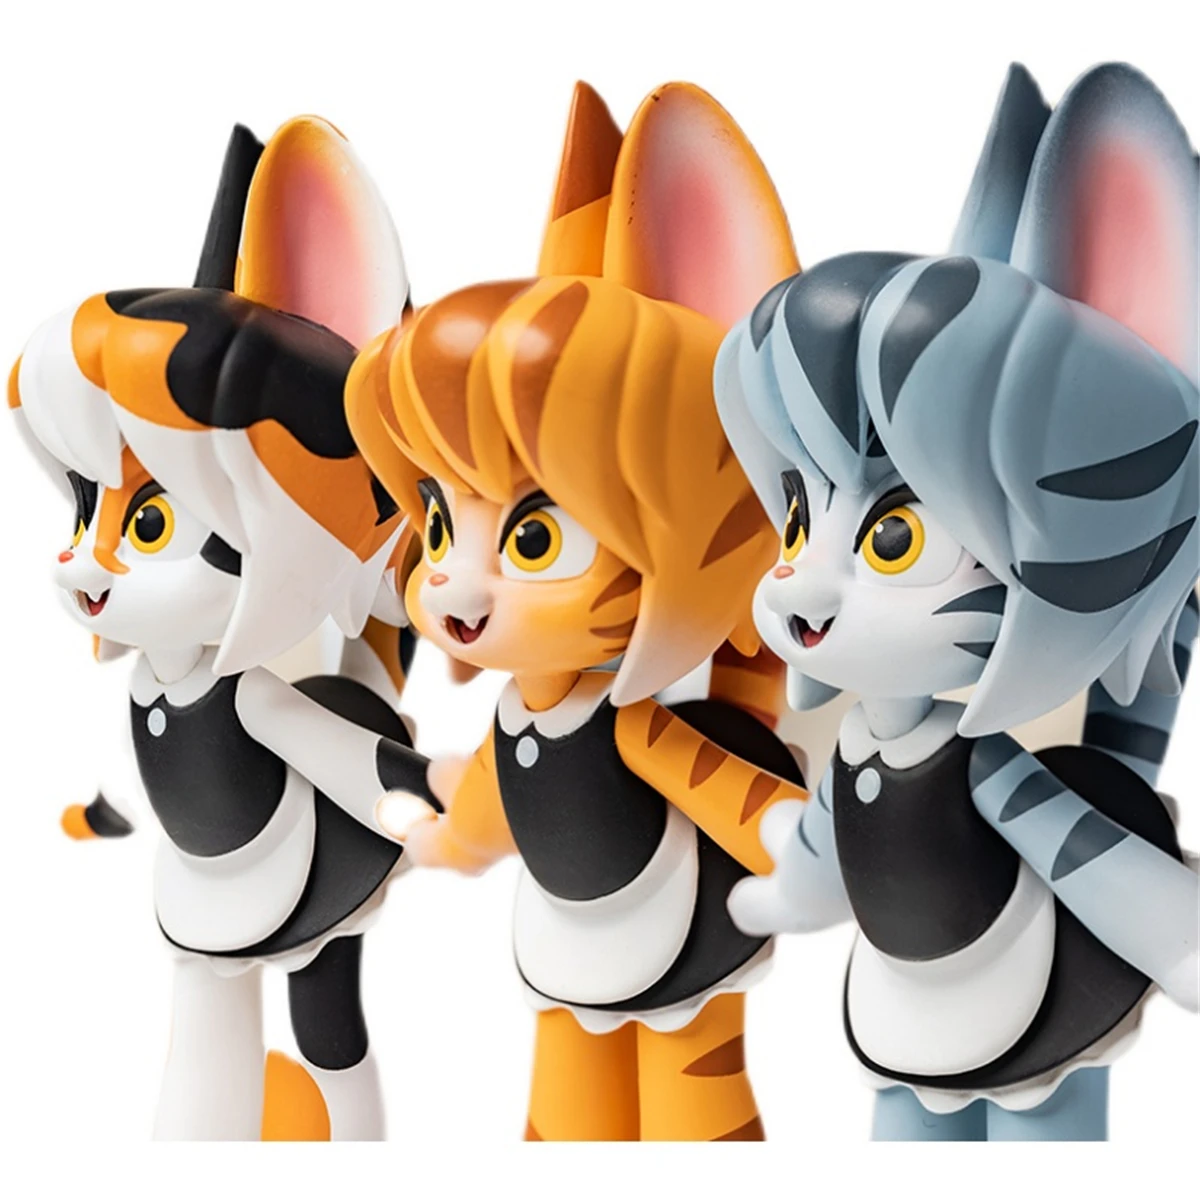 

10Pcs The Maid Cat Blind Box Model Cute Pet Animal Figure Collector Decor Kid Toy Gift Crafts Souvenirs Decor Vehicle Simulation